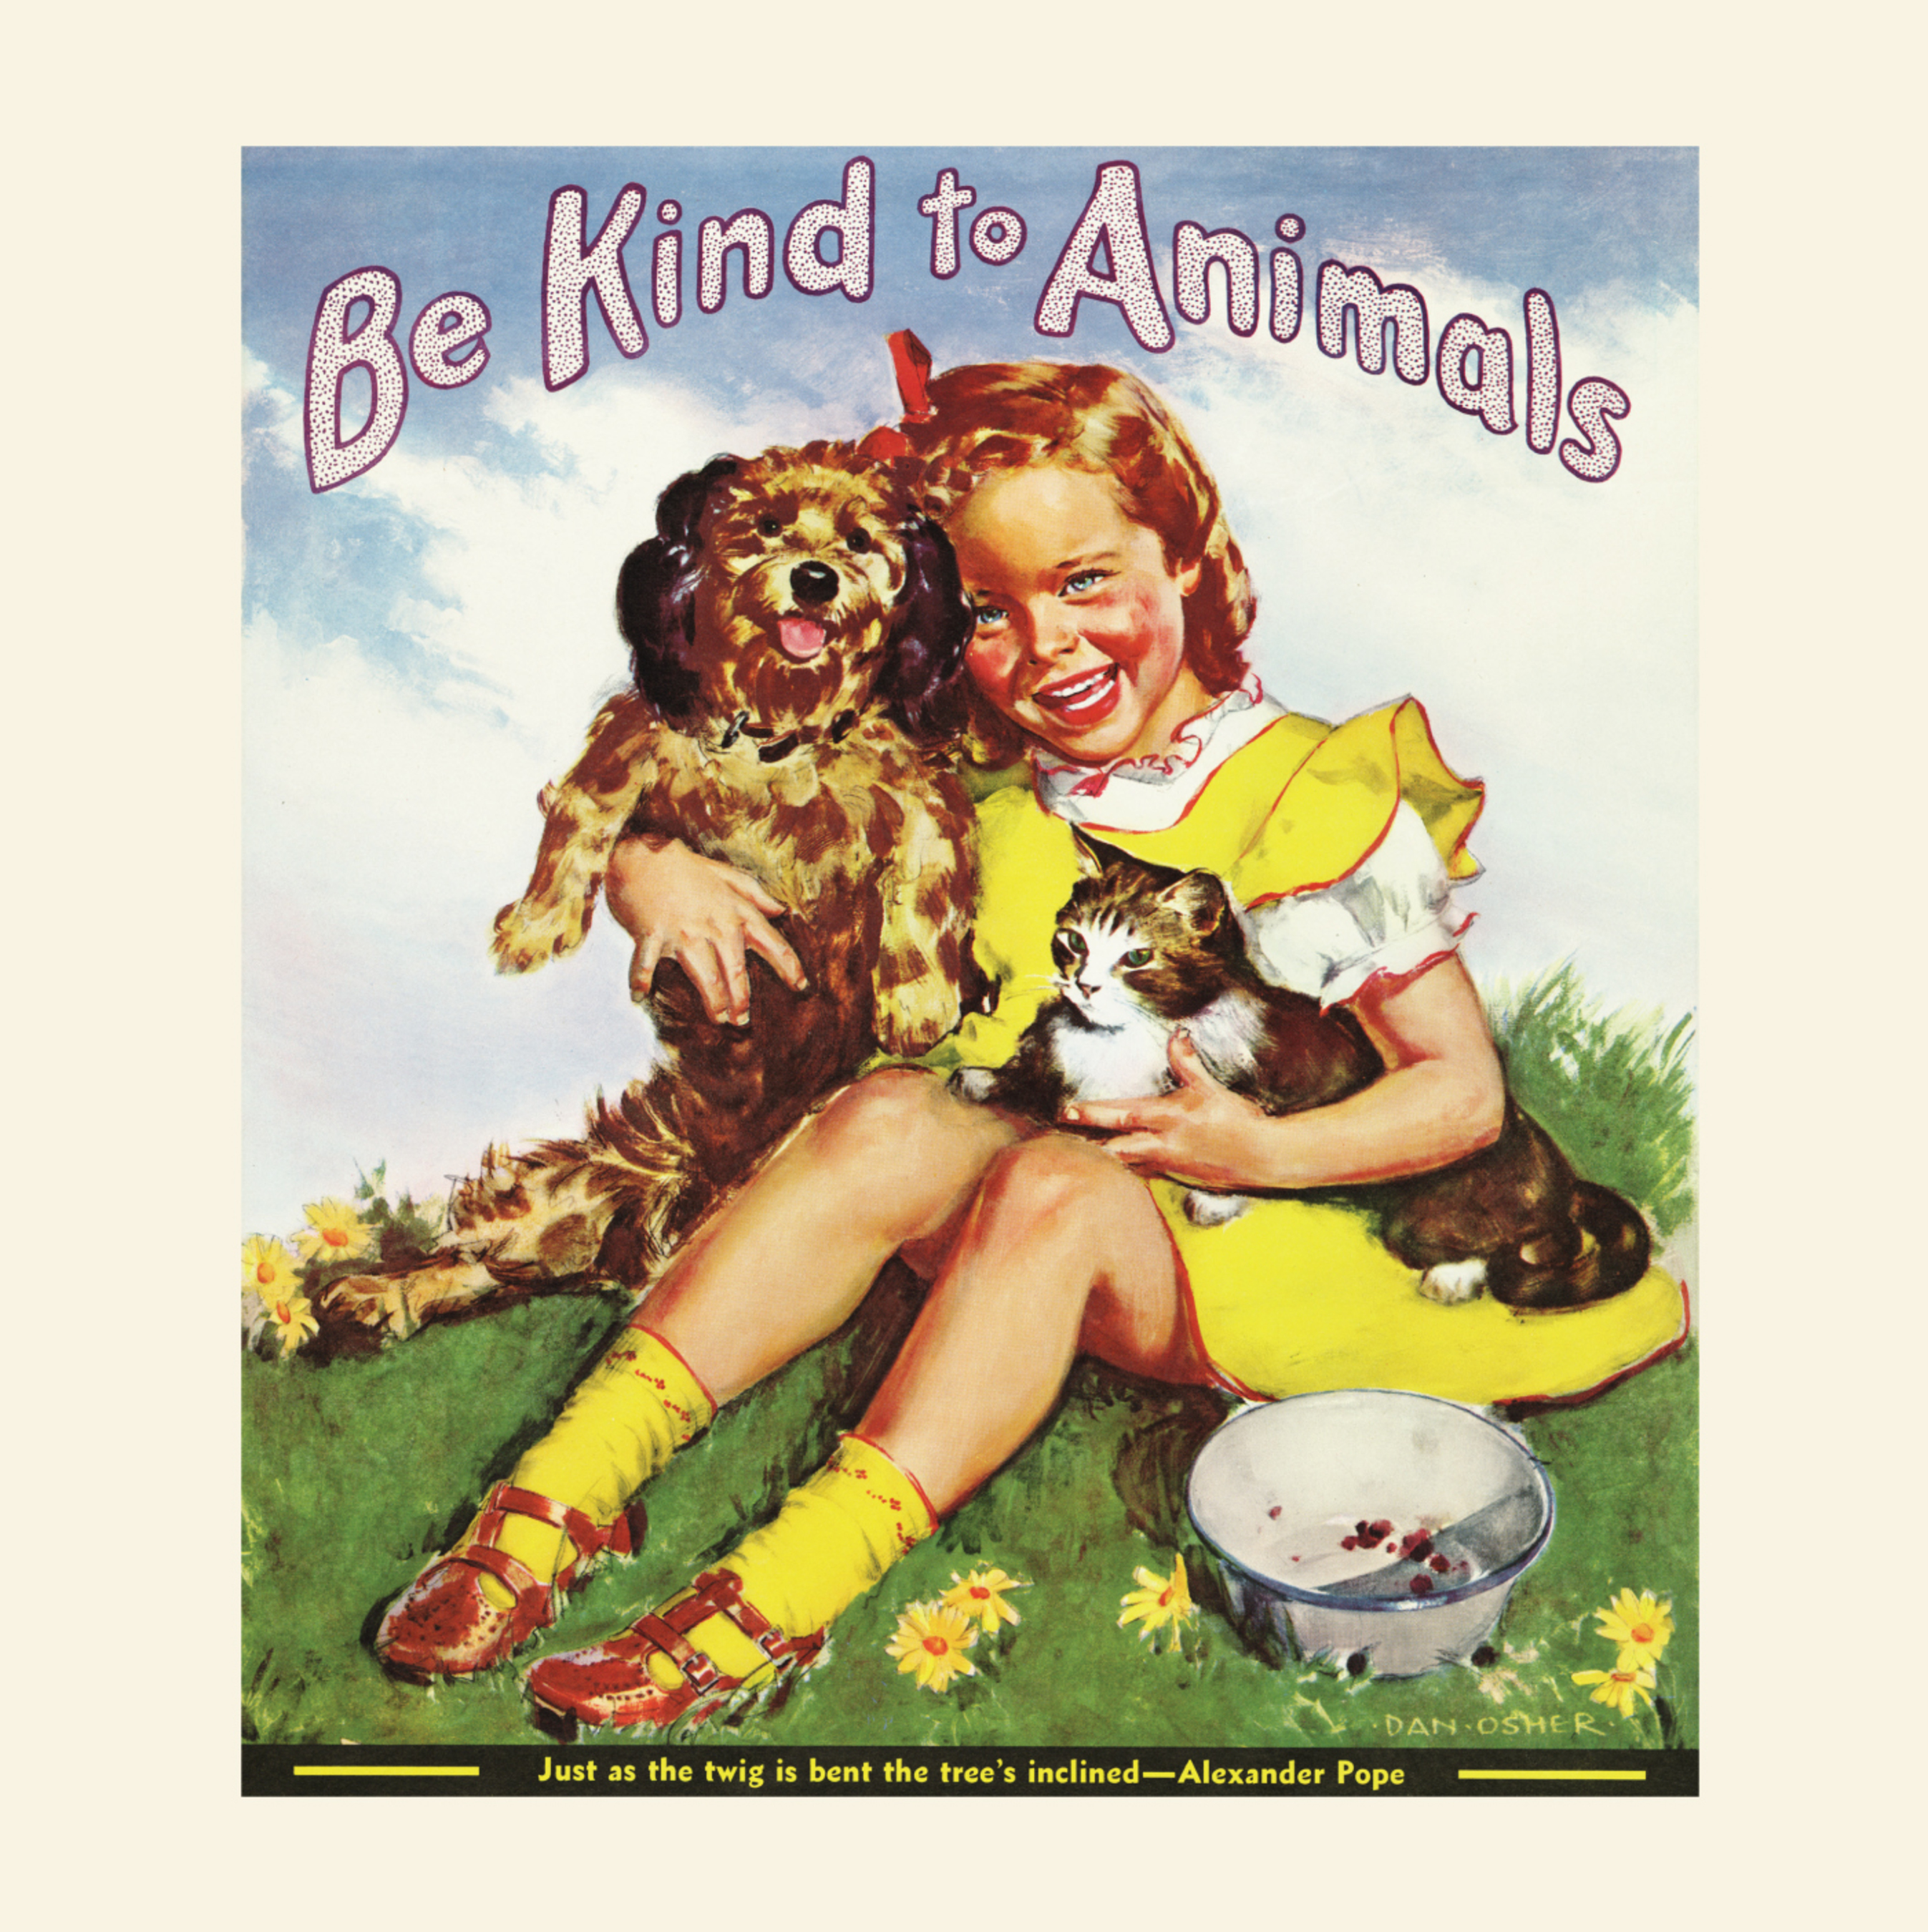 Celebrate Be Kind to Animals Week May 4-10, the country's oldest commemorative week created by American Humane Association in 1915! For ways to join the Compassion Movement and help animals today, go to www.americanhumane.org/bekind  (PRNewsFoto/American Humane Association )